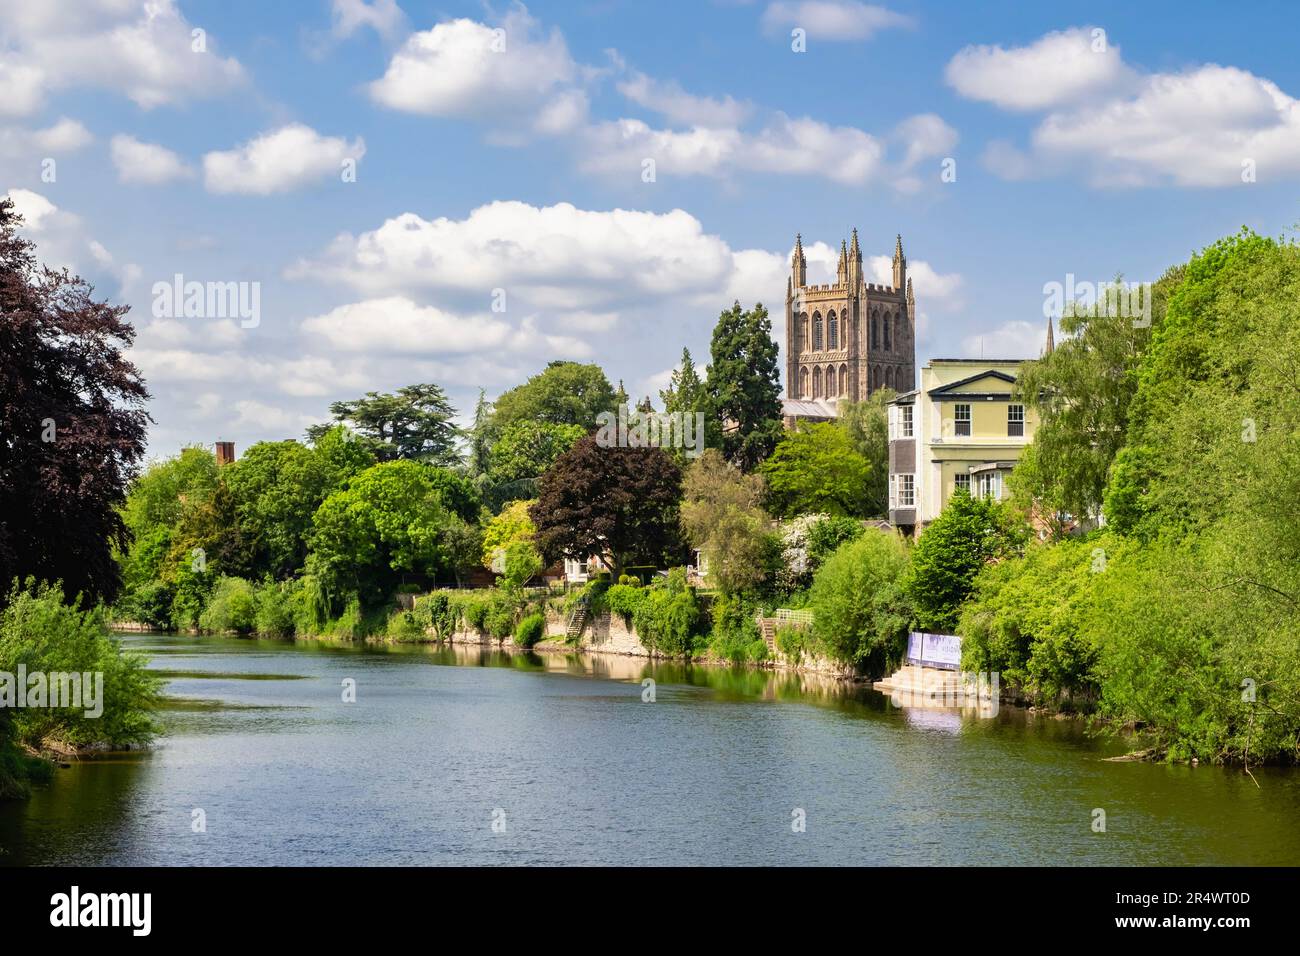 View across the Rver Wye to the Cathedral of Saint Mary the Virgin in Hereford, Herefordshire, England, UK, Britain Stock Photo